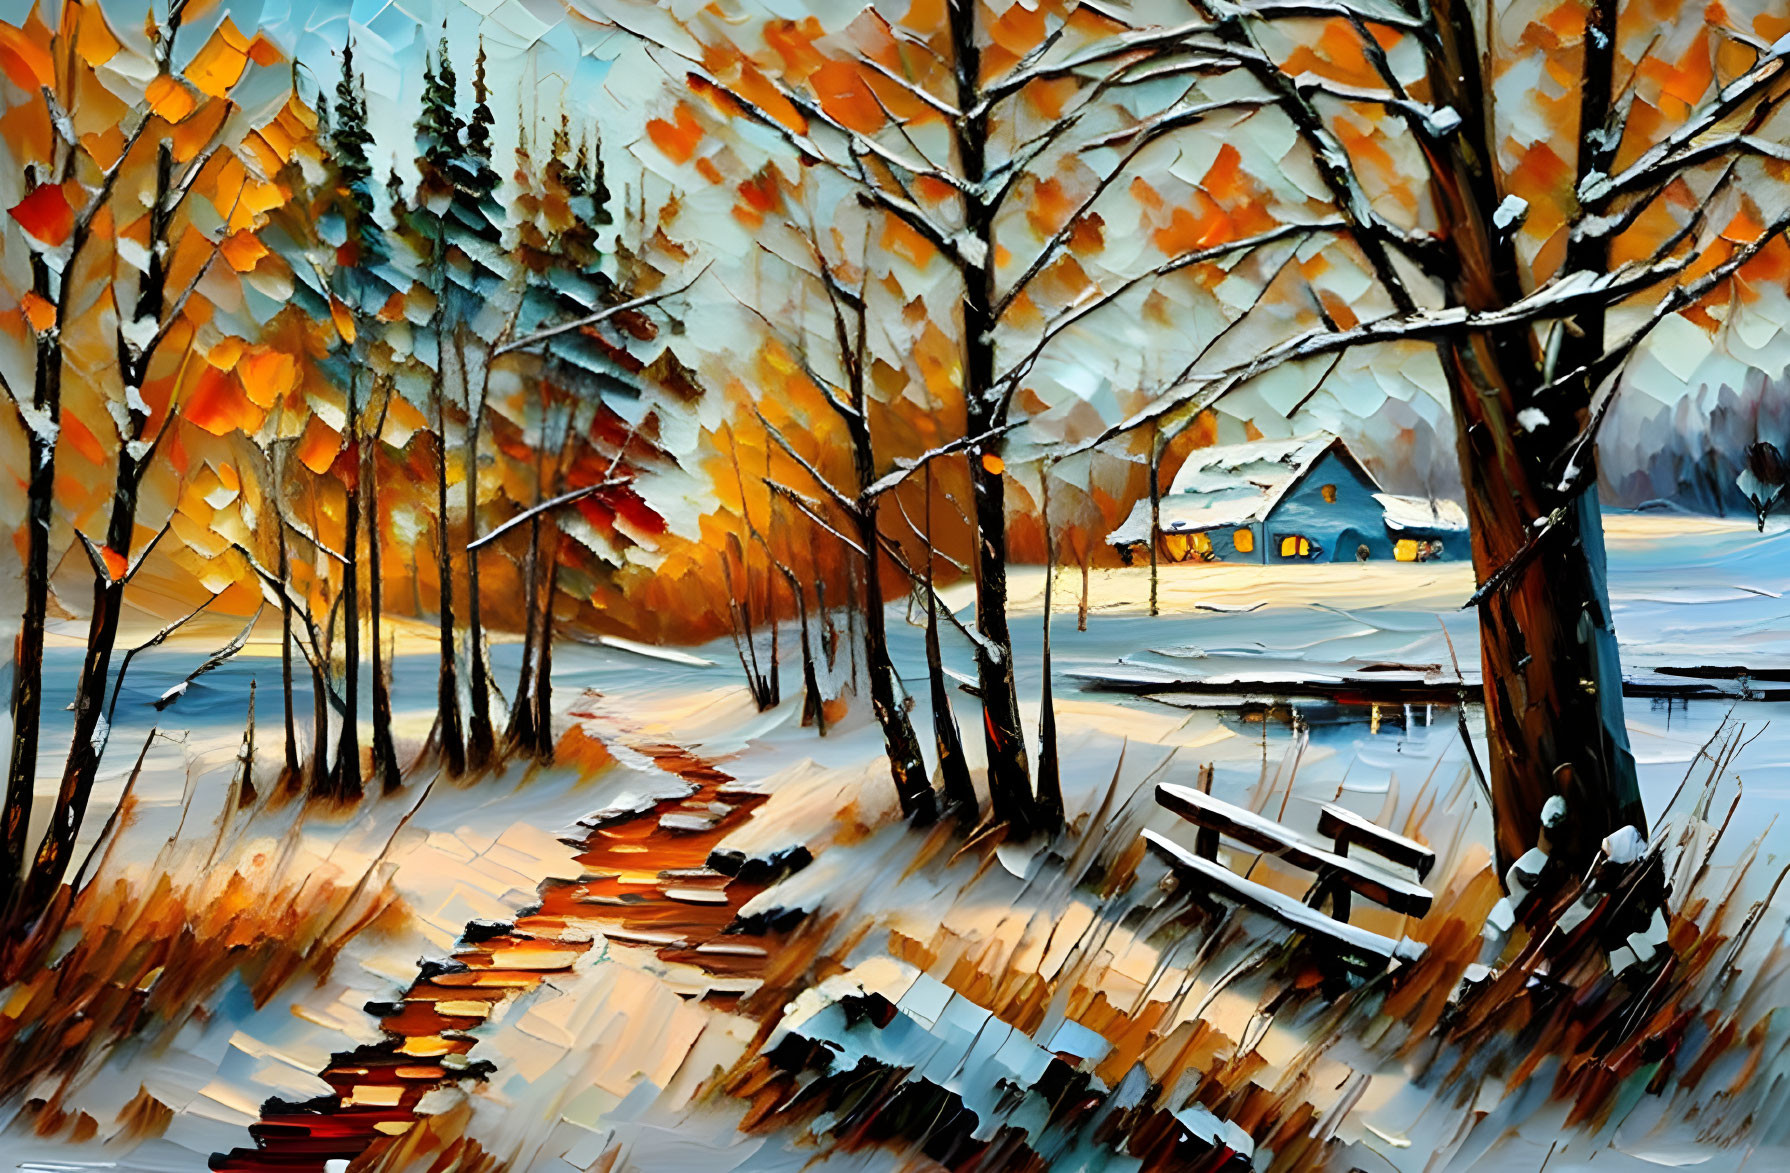 Snowy Path with Vibrant Autumnal Trees and Cozy Cottage by Frozen Lake